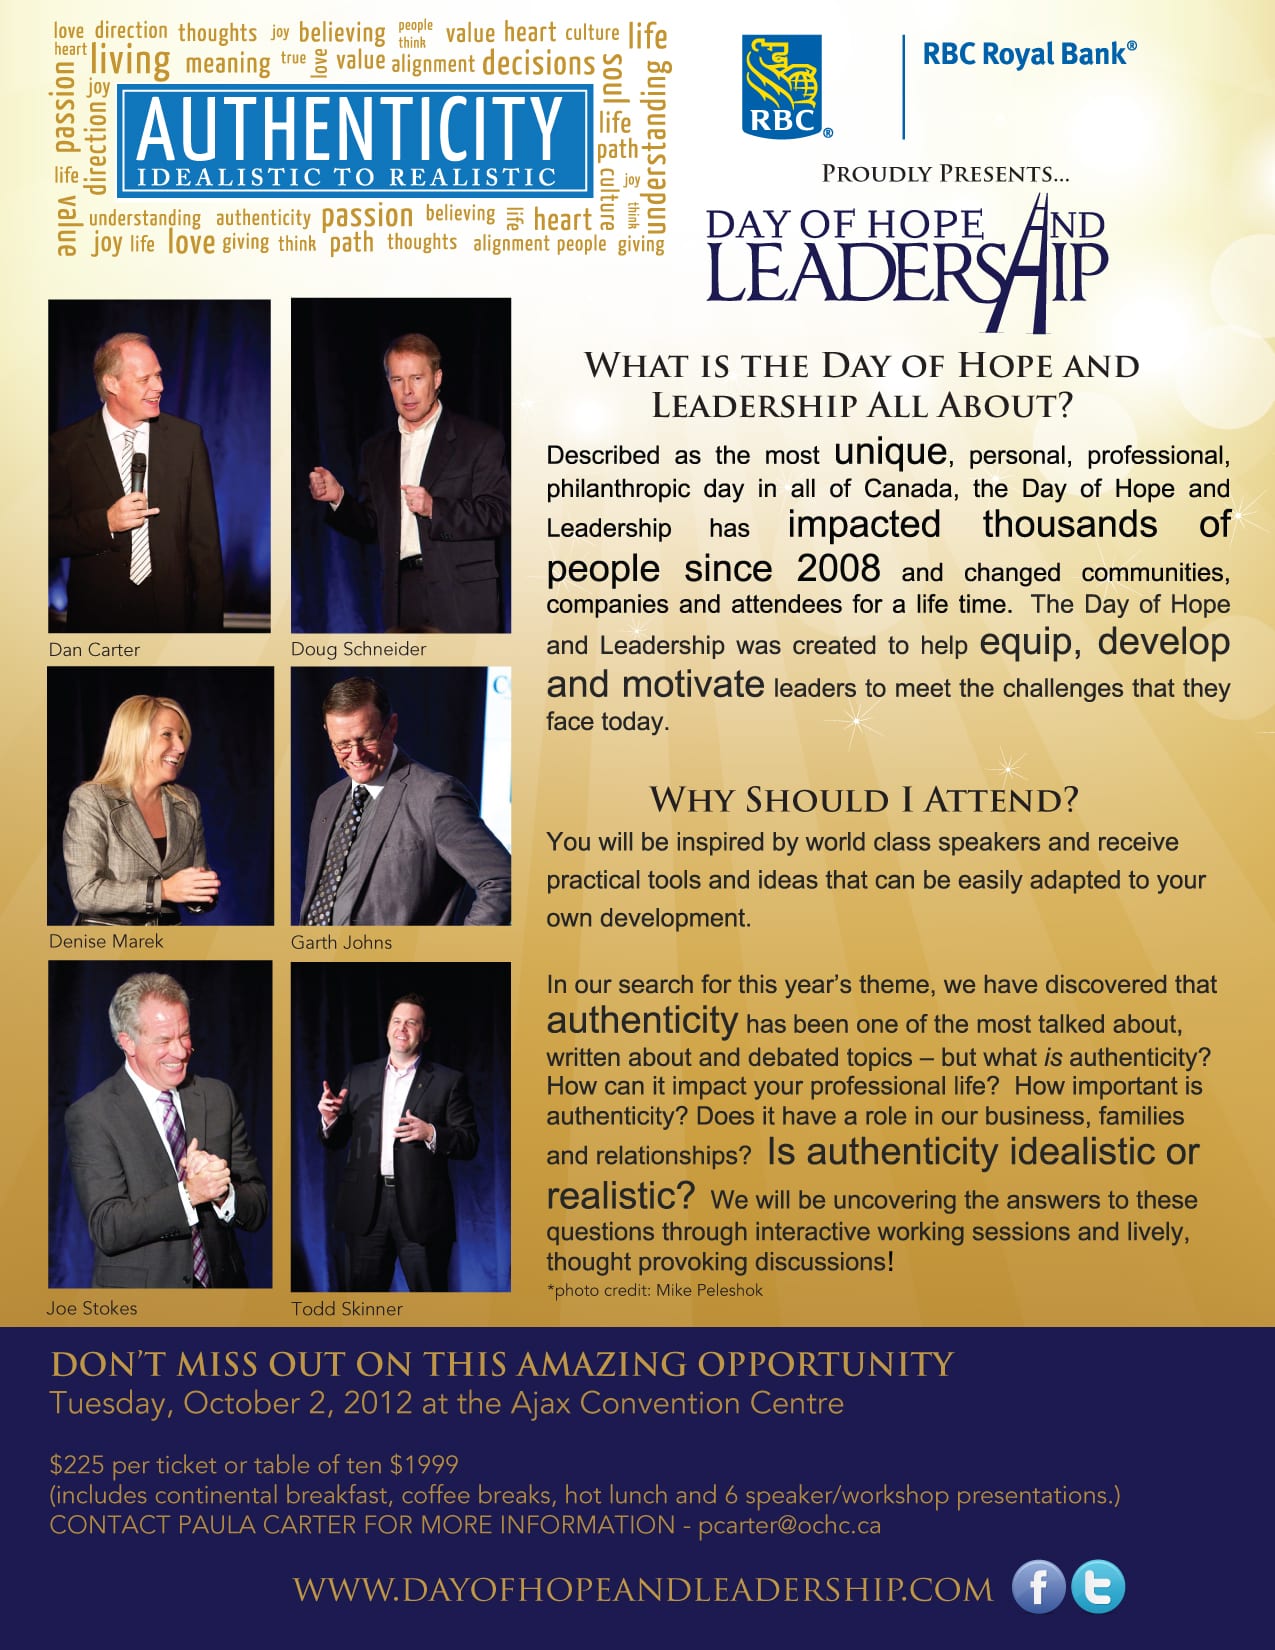 Day of Hope & Leadership poster and link